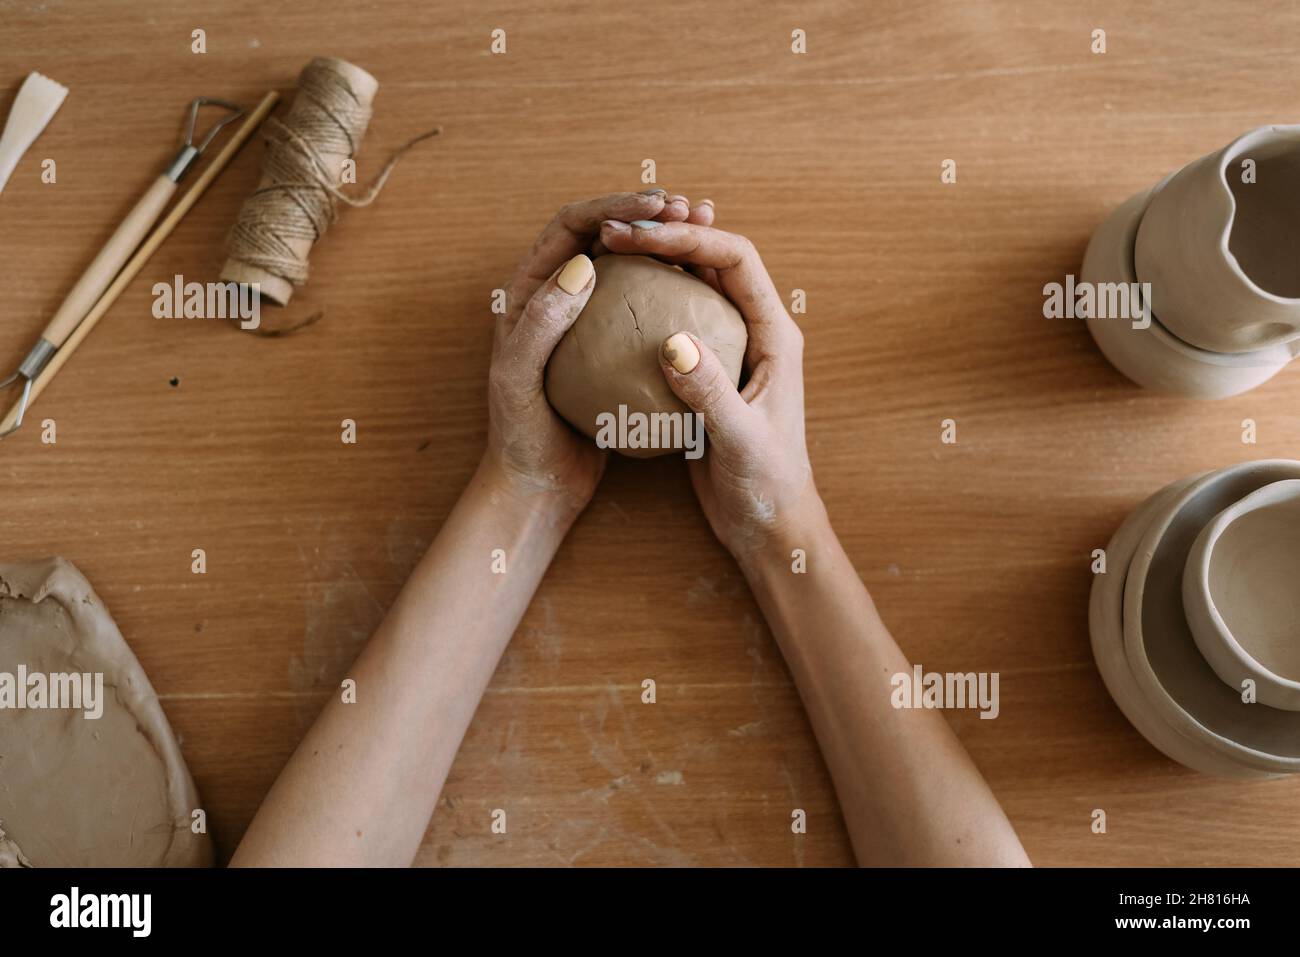 The stage of creating a pot from clay. Female hands making a hole in a piece of clay. craft work and creative craft concept. Stock Photo